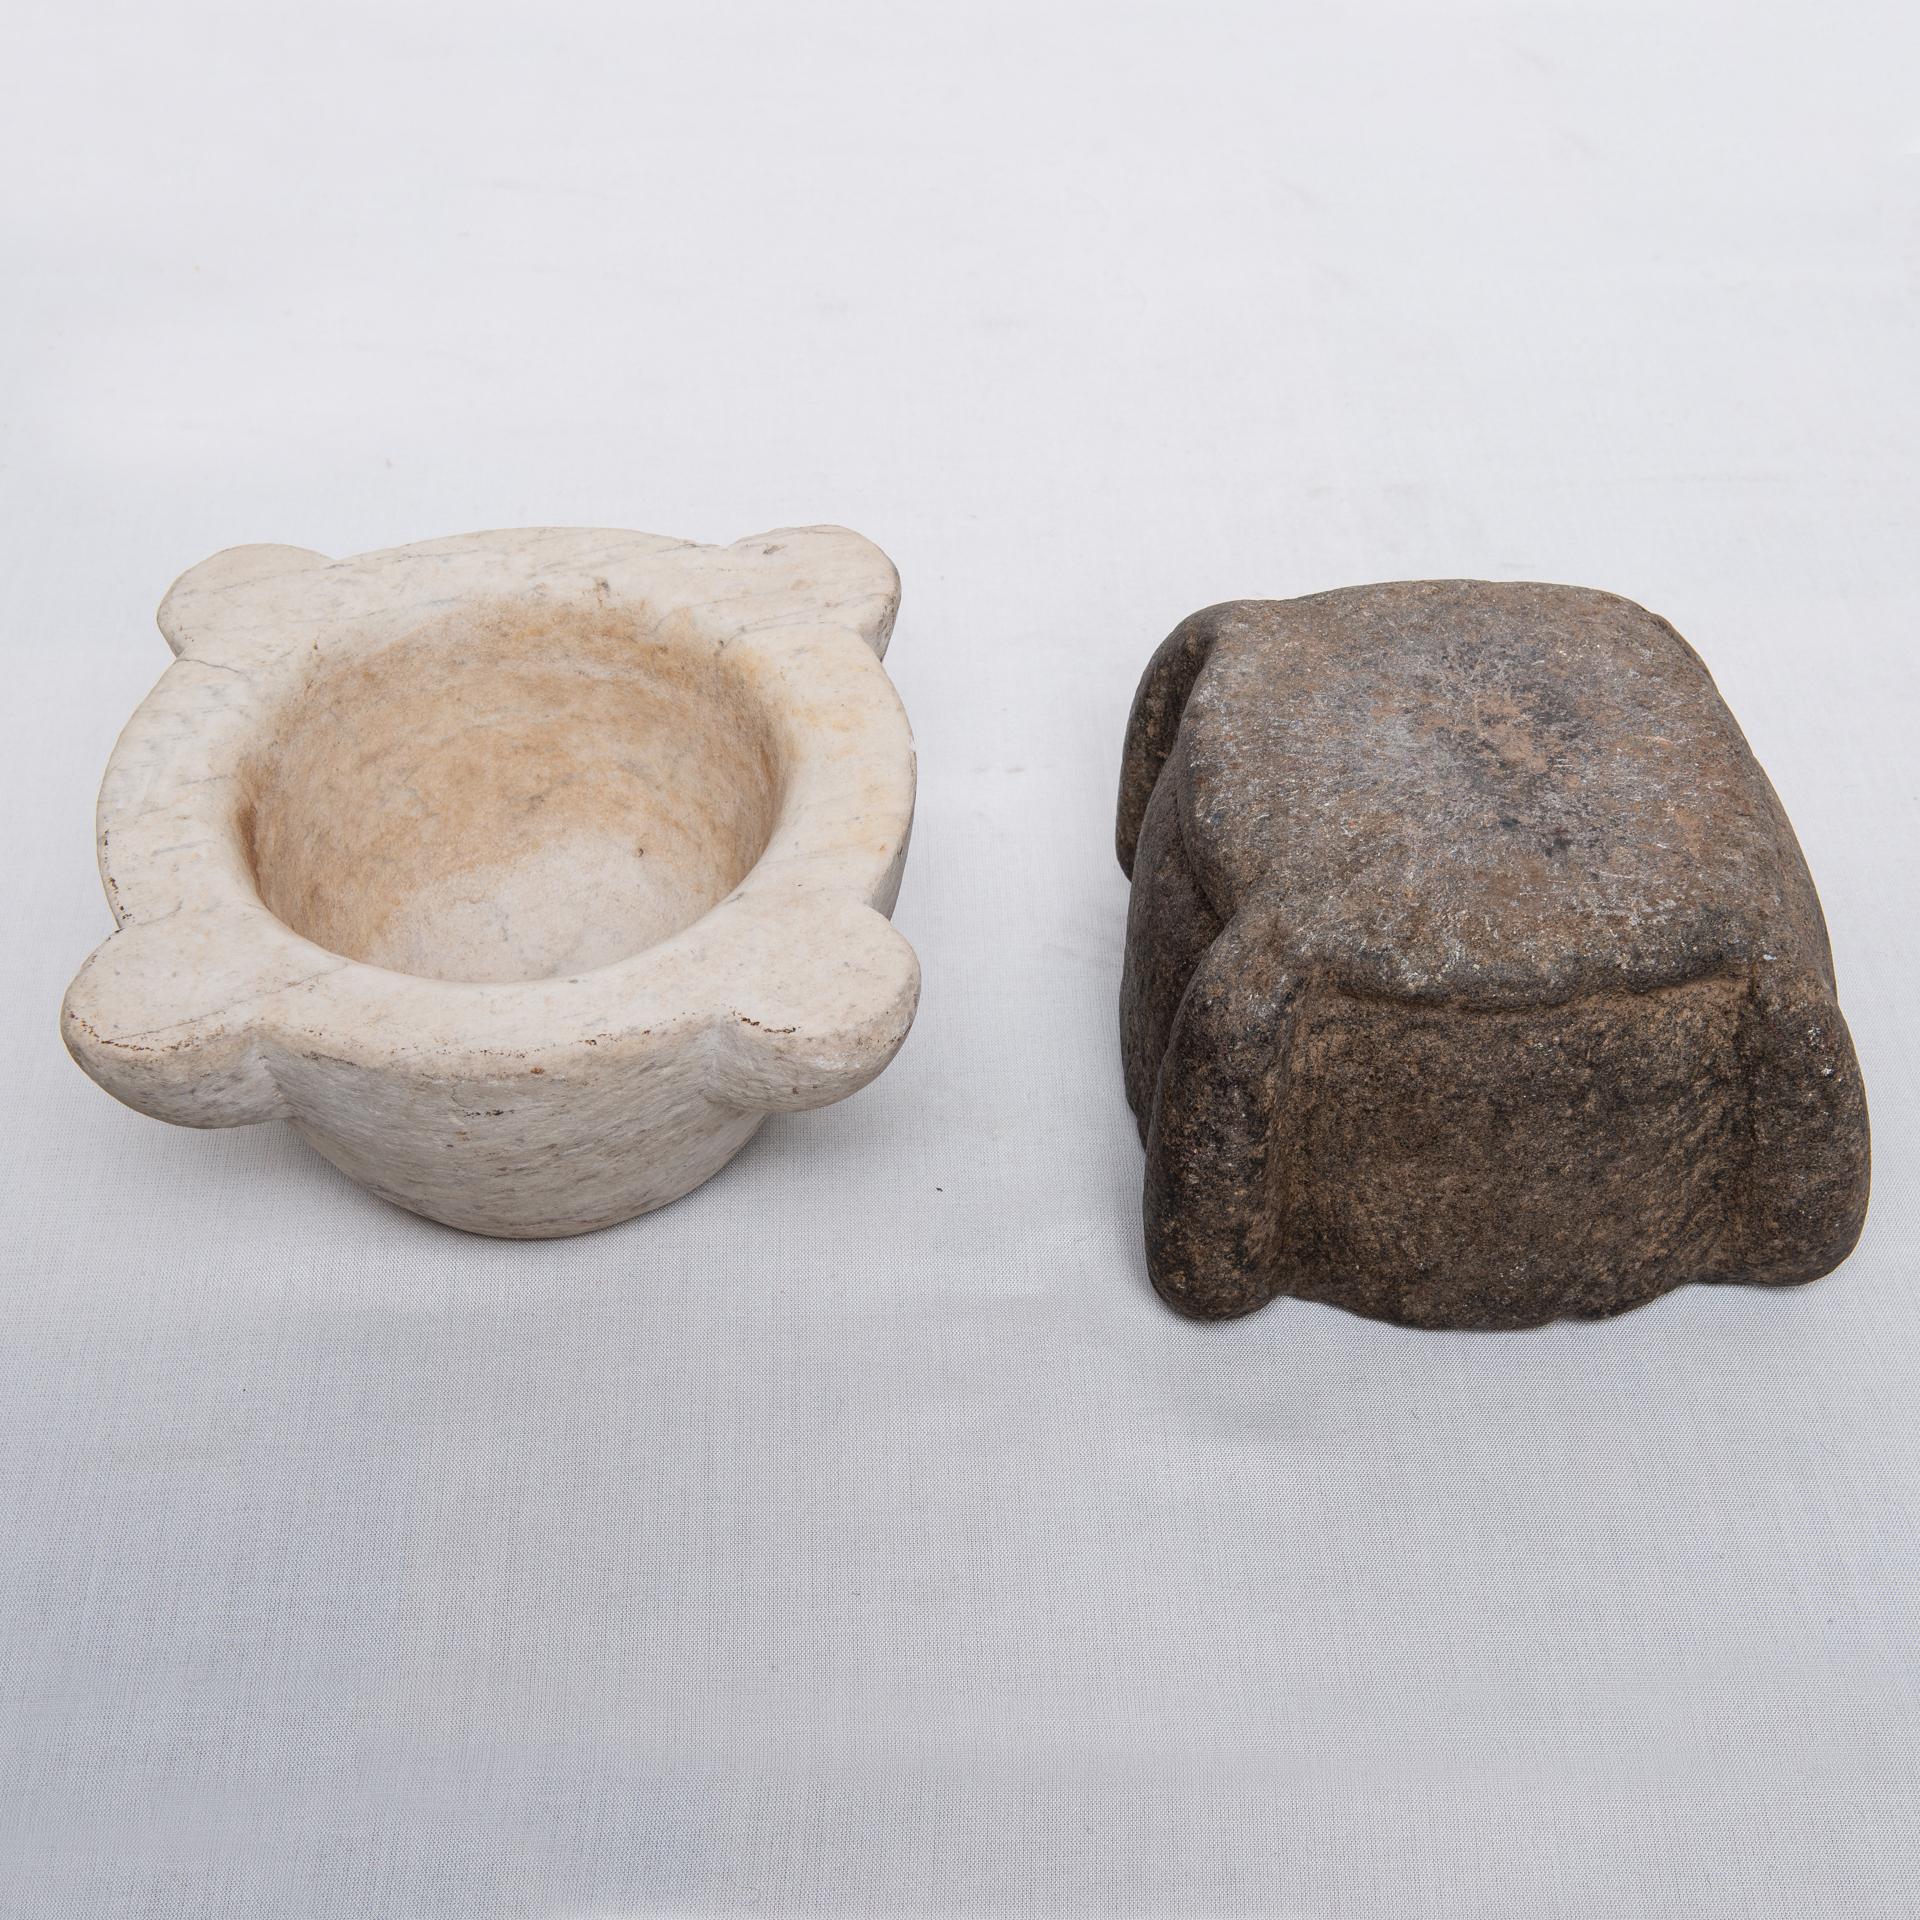 Two antique mortars for Your kitchen: one in white marble, smaller; the other one (darker) in stone, more antique.
The mortar is very useful in the kitchen: in Italy it is used to crush pine nuts with basil and obtain 